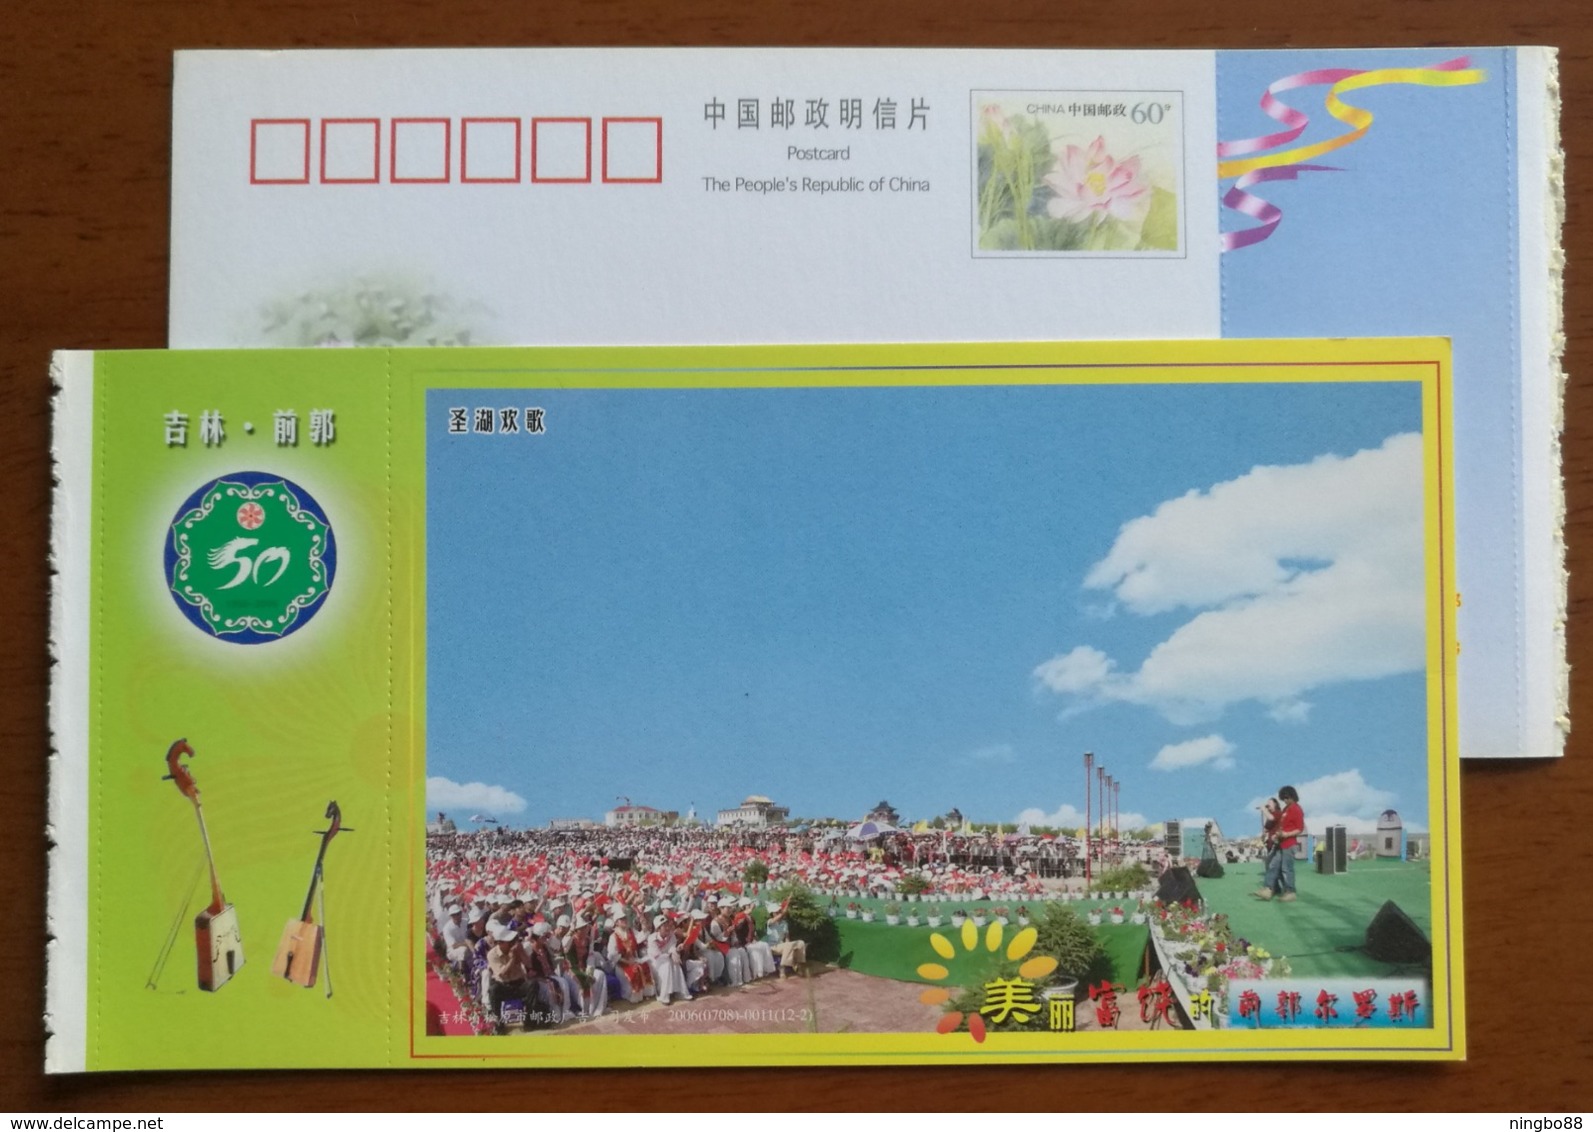 Horse-headed Lyre,holy Lake Music Festival,CN 06 Qianguo 50th Anni. Of Mongolian Autonomous County Pre-stamped Card - Música